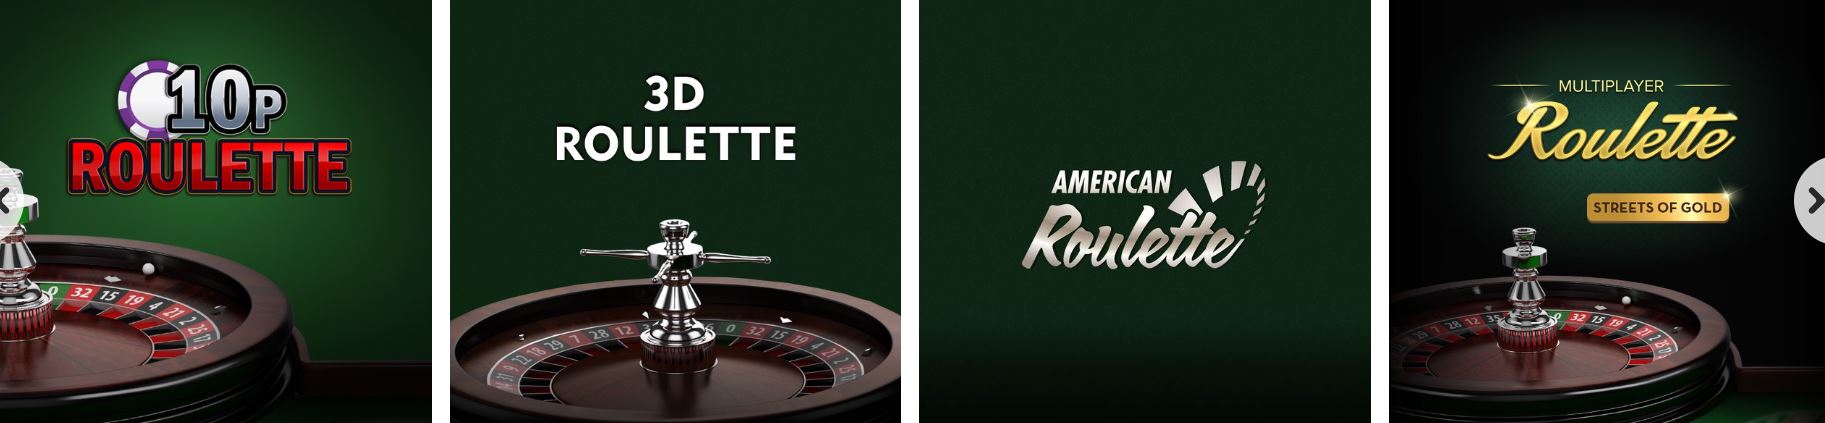 Roulette strategies are useful for learning to play.